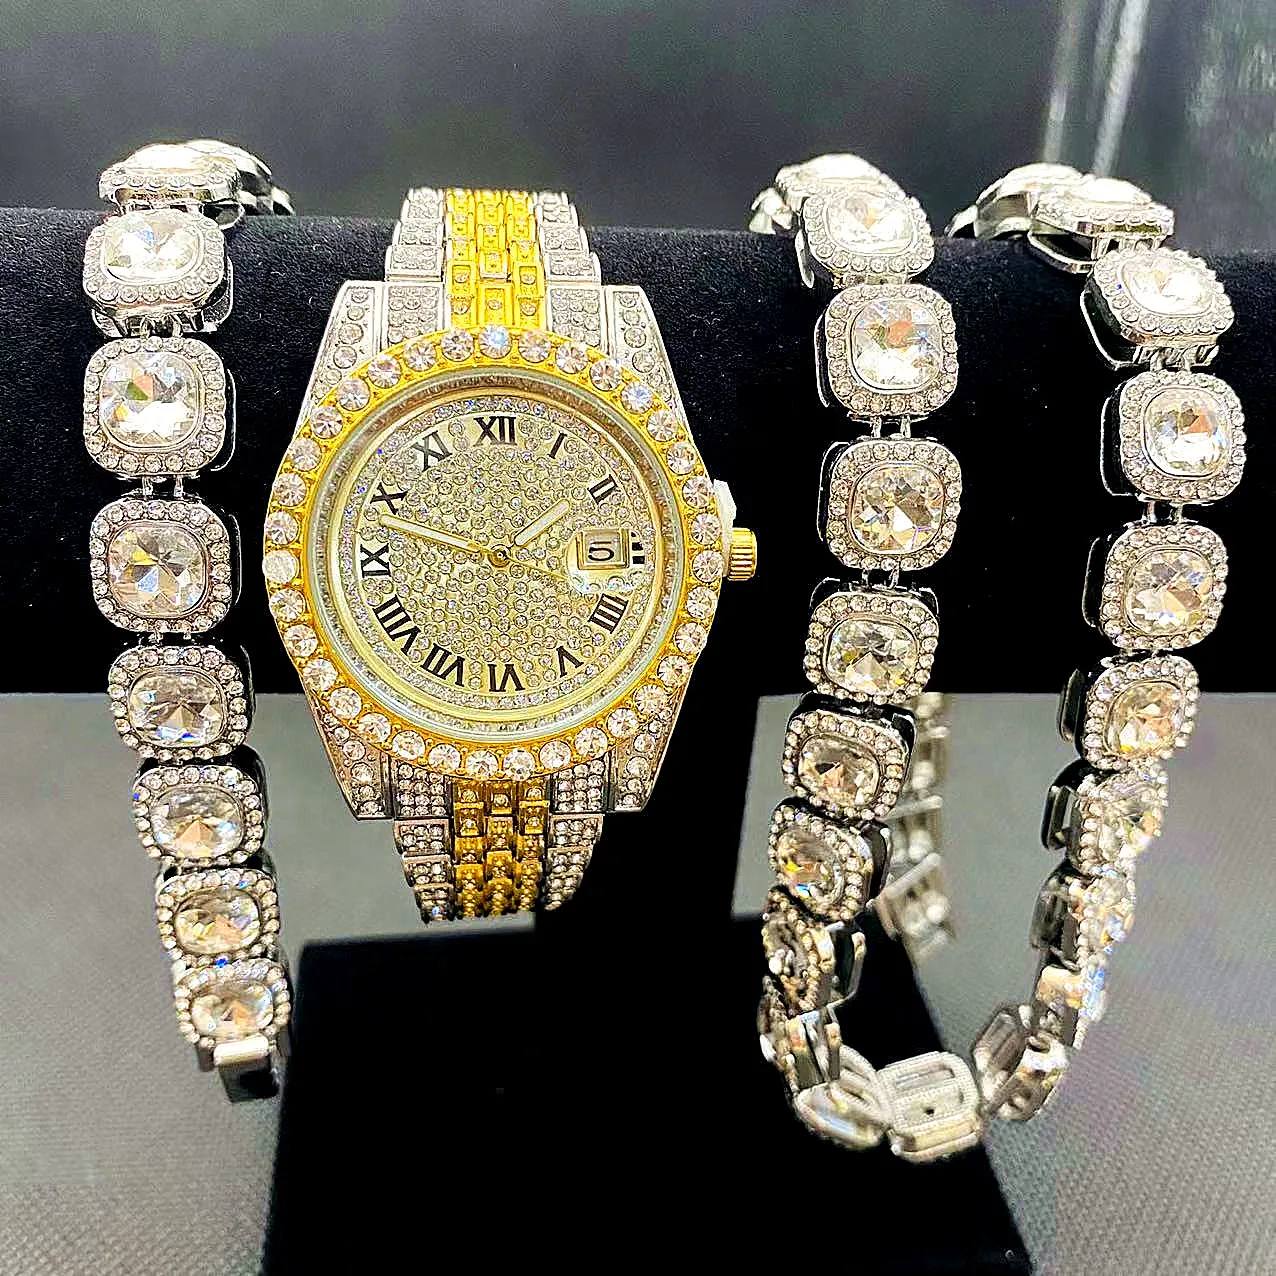 3pcs Full Iced Out Watches Mens Gold Cuban Tennis Chain Bracelet Necklace Bling Watch for Men HipHop Jewelry Men Watch Clock Set 2pcs set iced out watch tennis bracelet for men women luxury cool hip hop gold mens watch set clock watches religio masculino